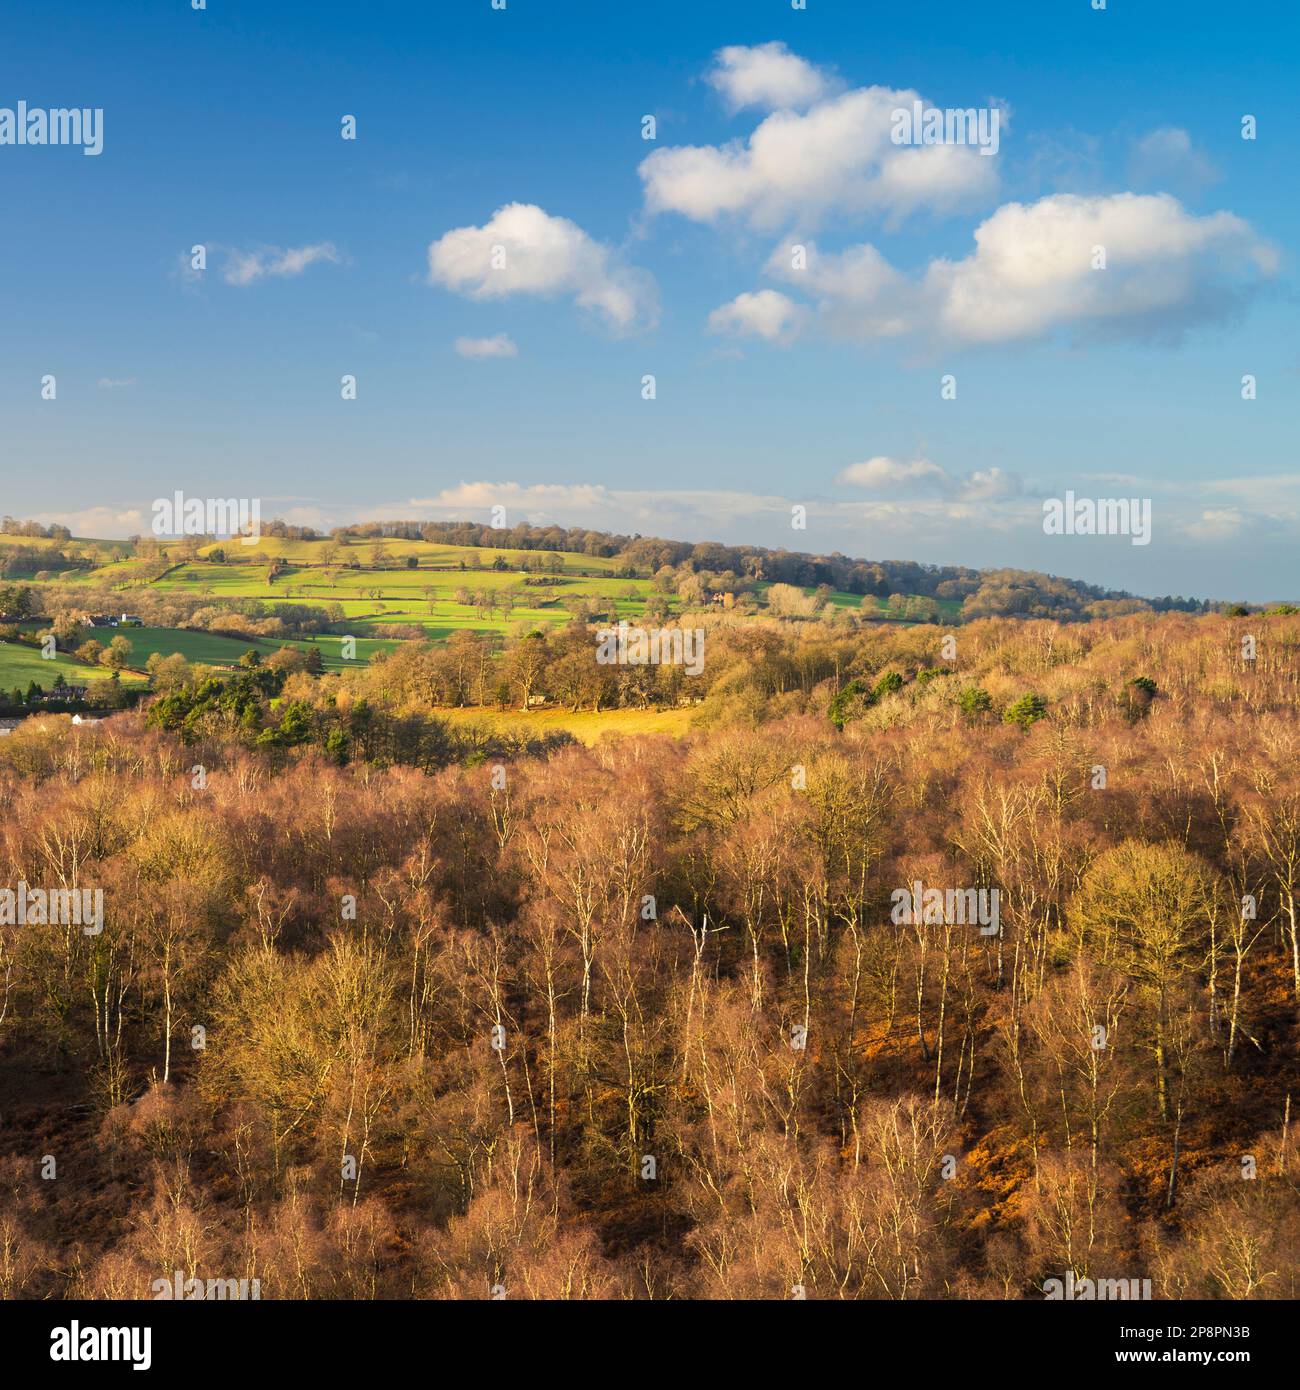 England, West Midlands, Kinver Edge. View from the top of Nannys Rock - a popular viewpoint along Kinver Edge. Stock Photo